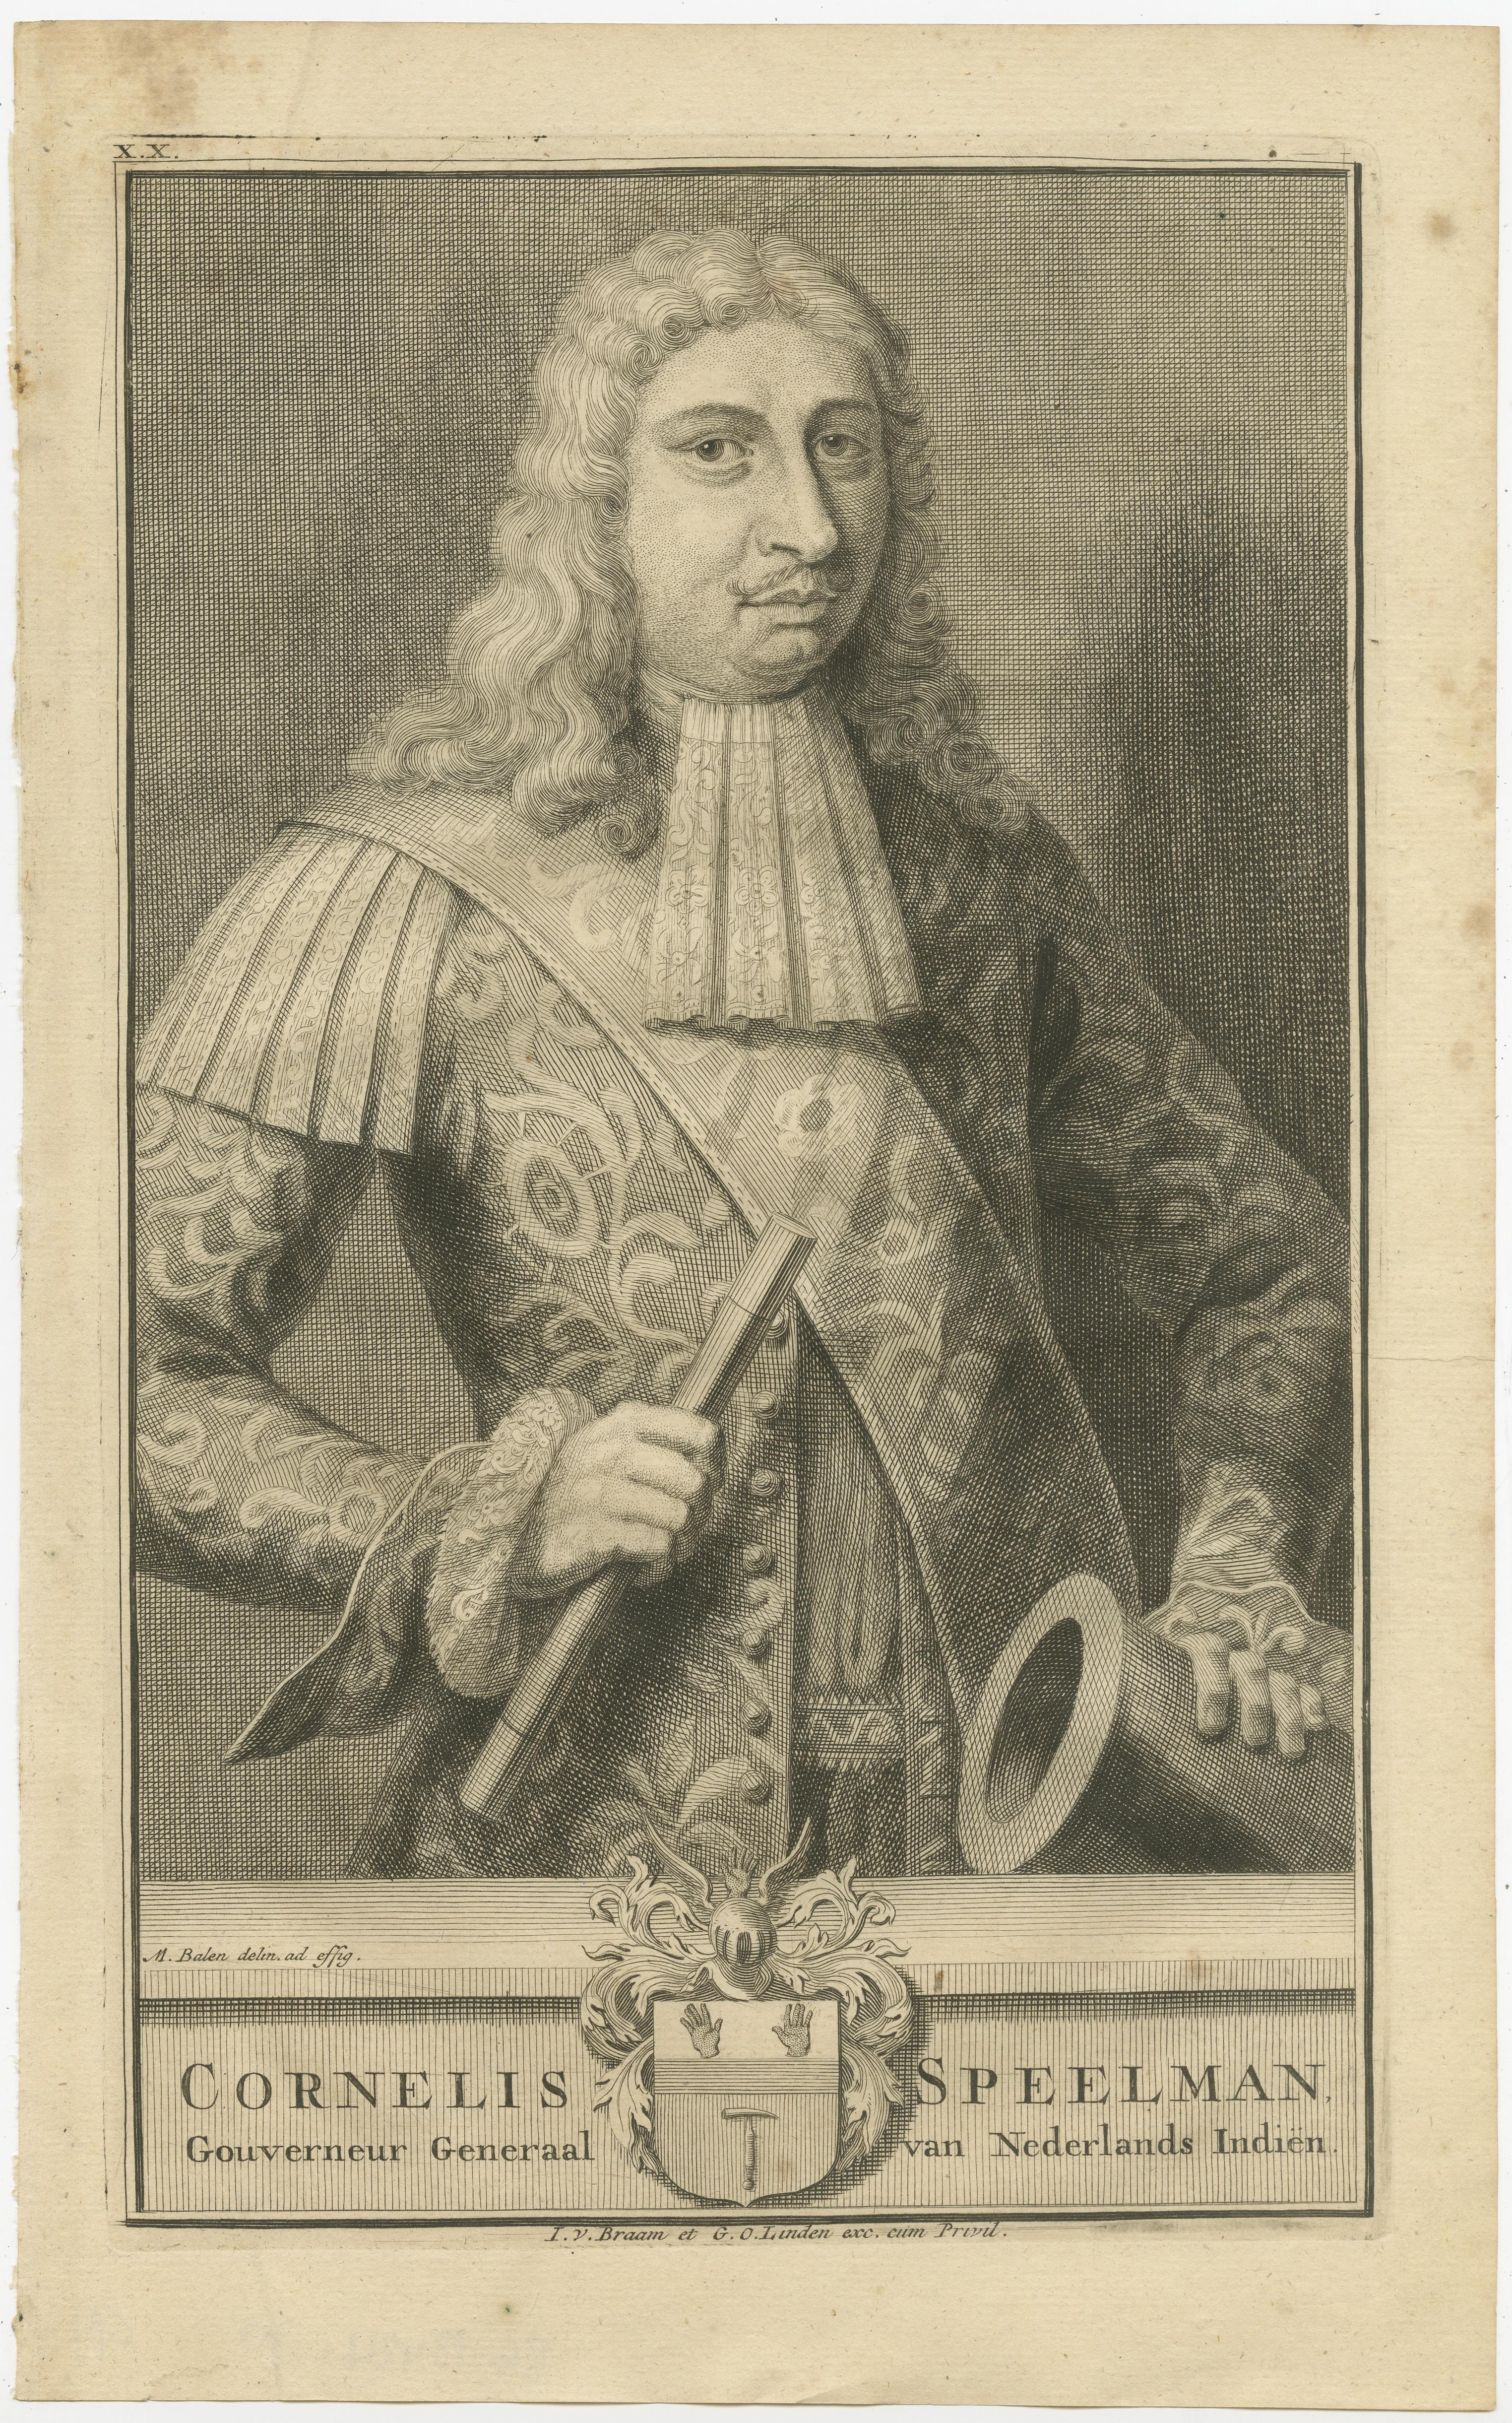 Early 18th Century Cornelis Speelman: Commanding Governor-General of the VOC, Dutch East Indies For Sale